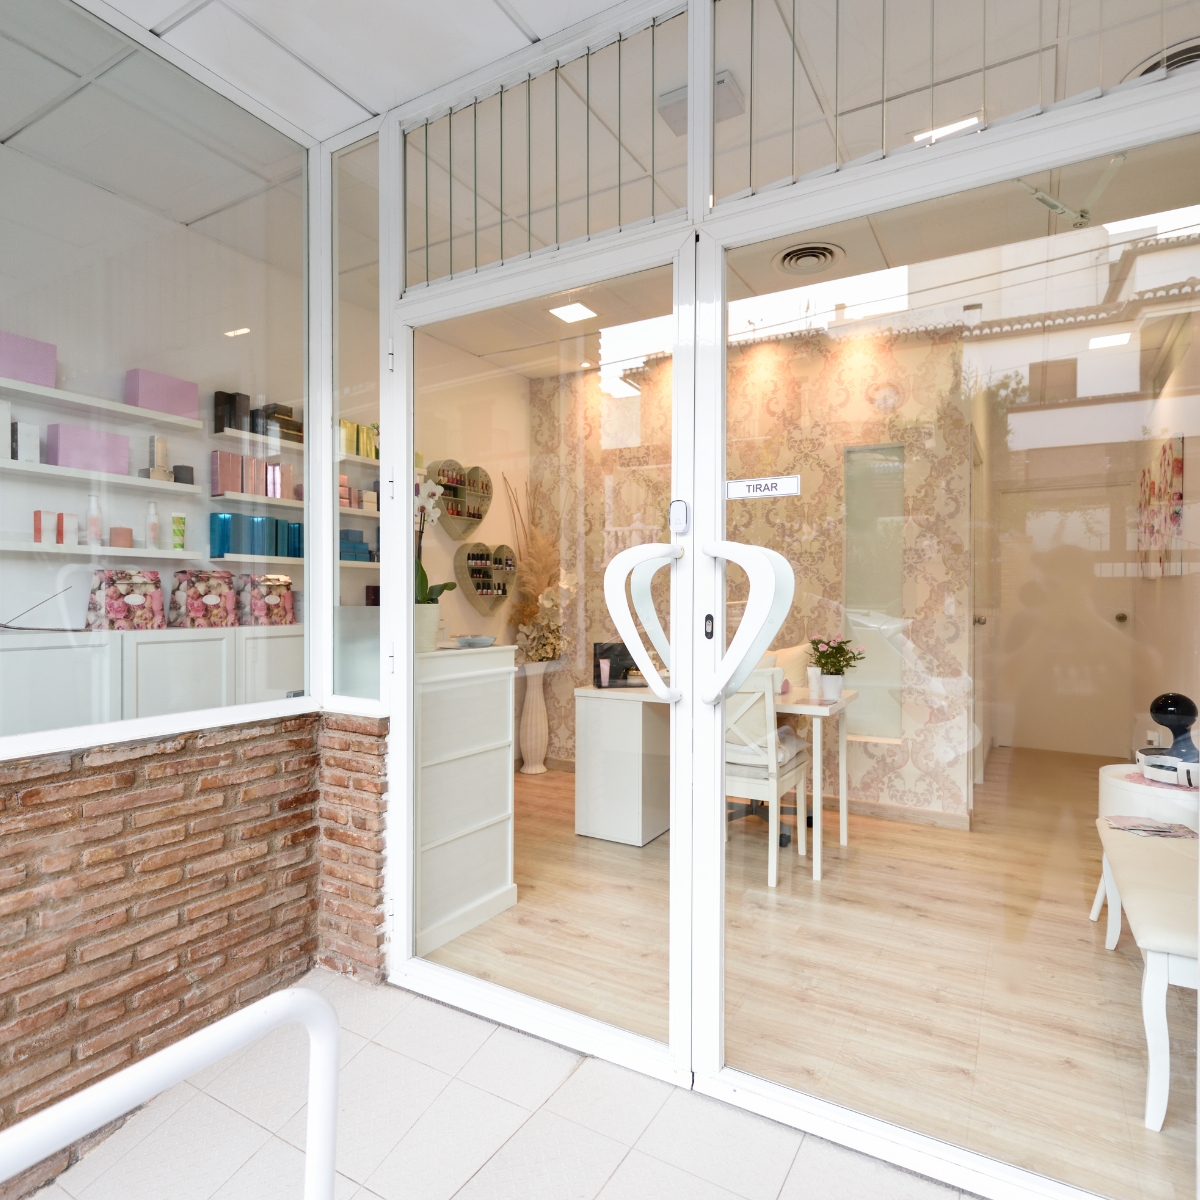 The newly remodeled retail store entrance to a beauty salon with a glass door.